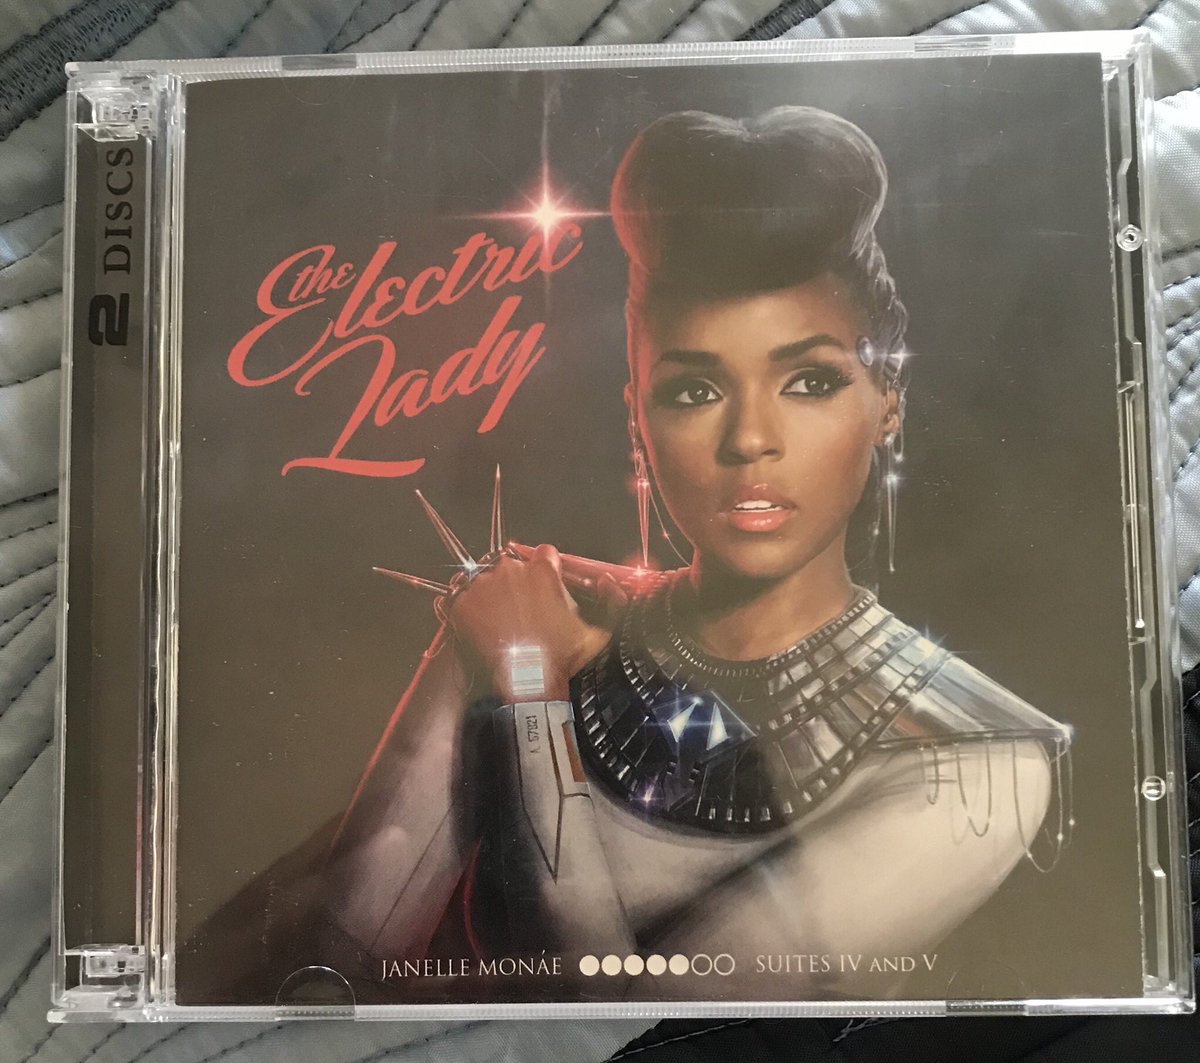 #8 : The Electric Lady by Janelle Monae. A defining album for me. A birthday gift from my folks, this album was played every day for 6 months. Truly she is one of my top 3 all time artists 